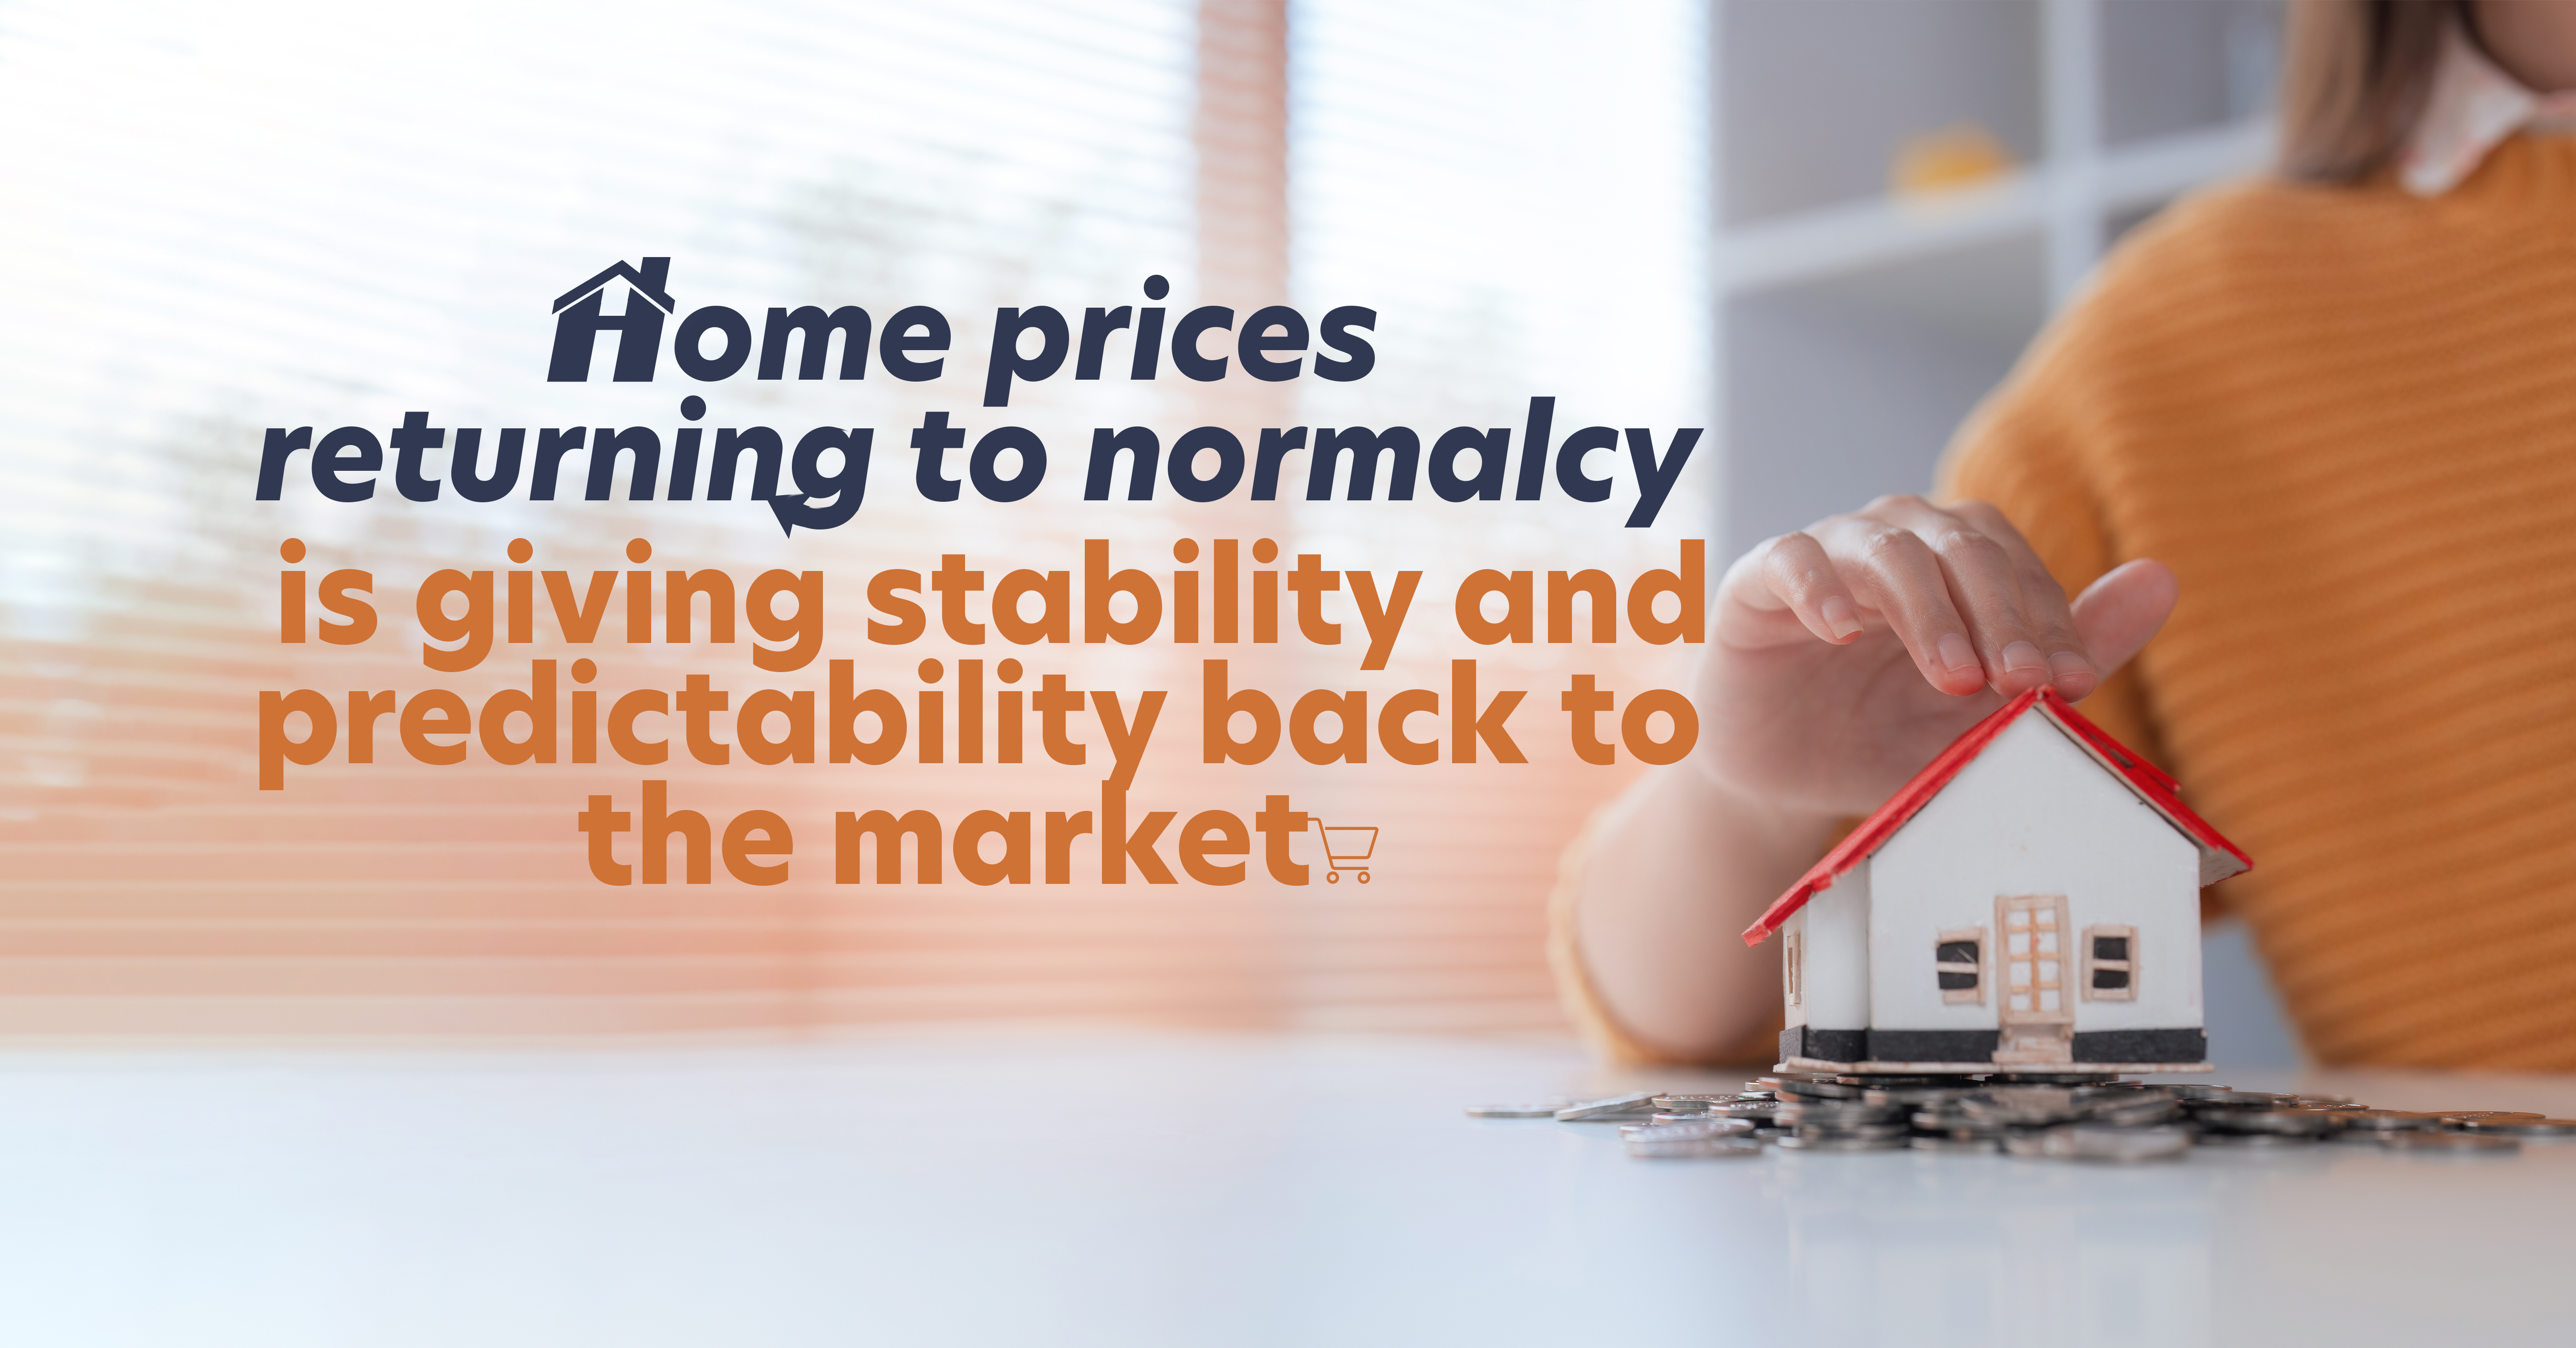 Home prices returning to normalcy is giving stability and predictability back to the market